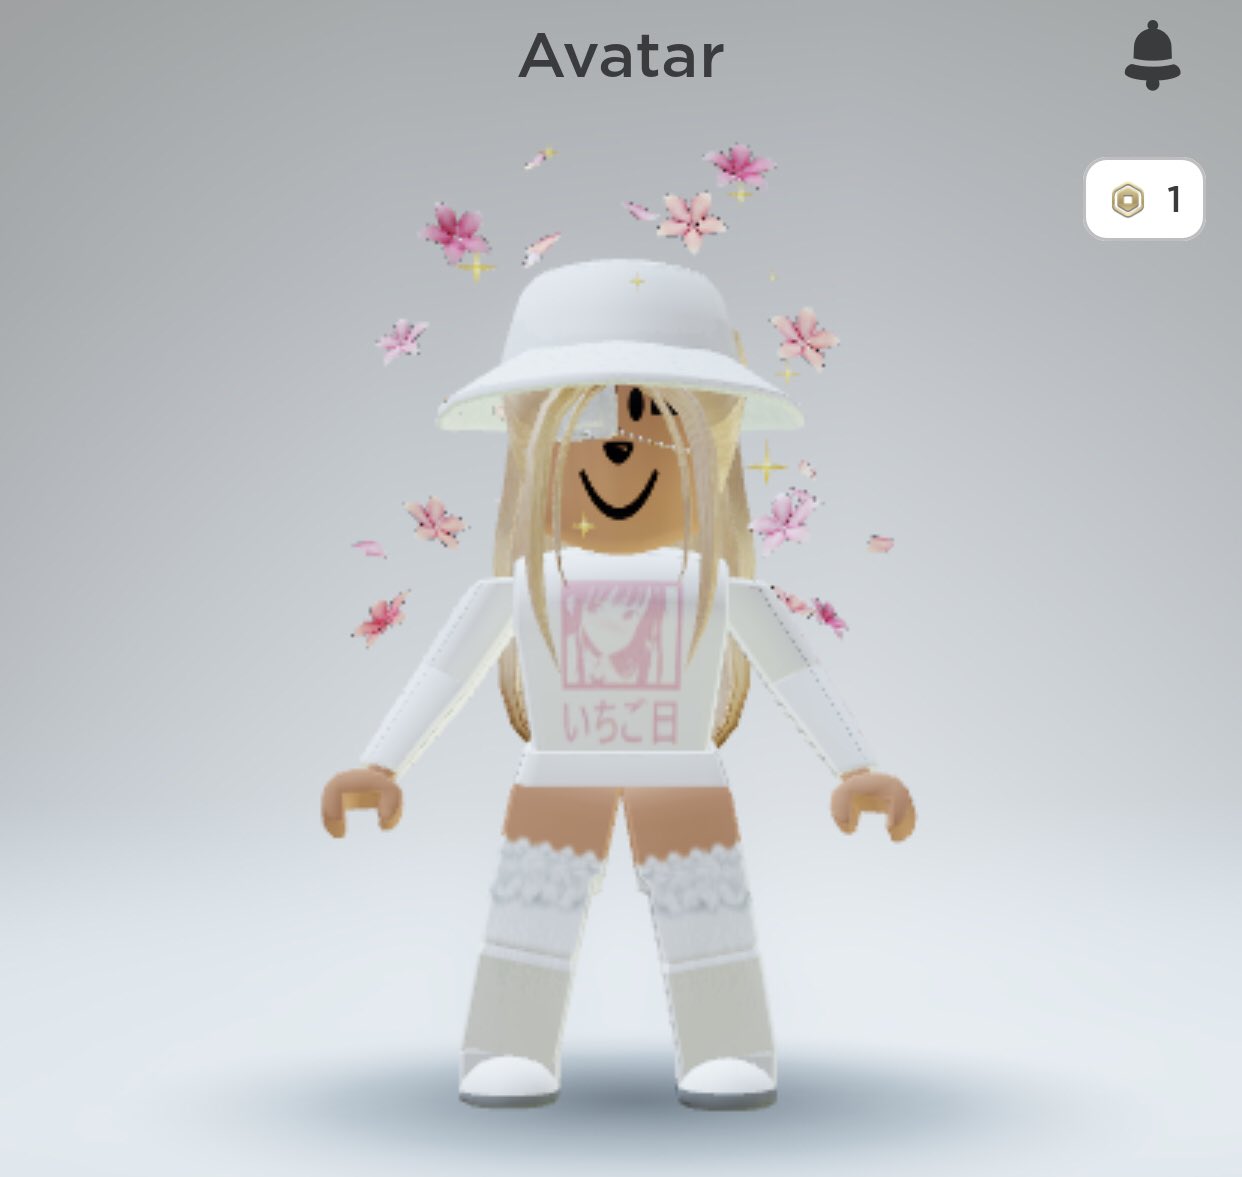 1,000 ROBUX OUTFIT 